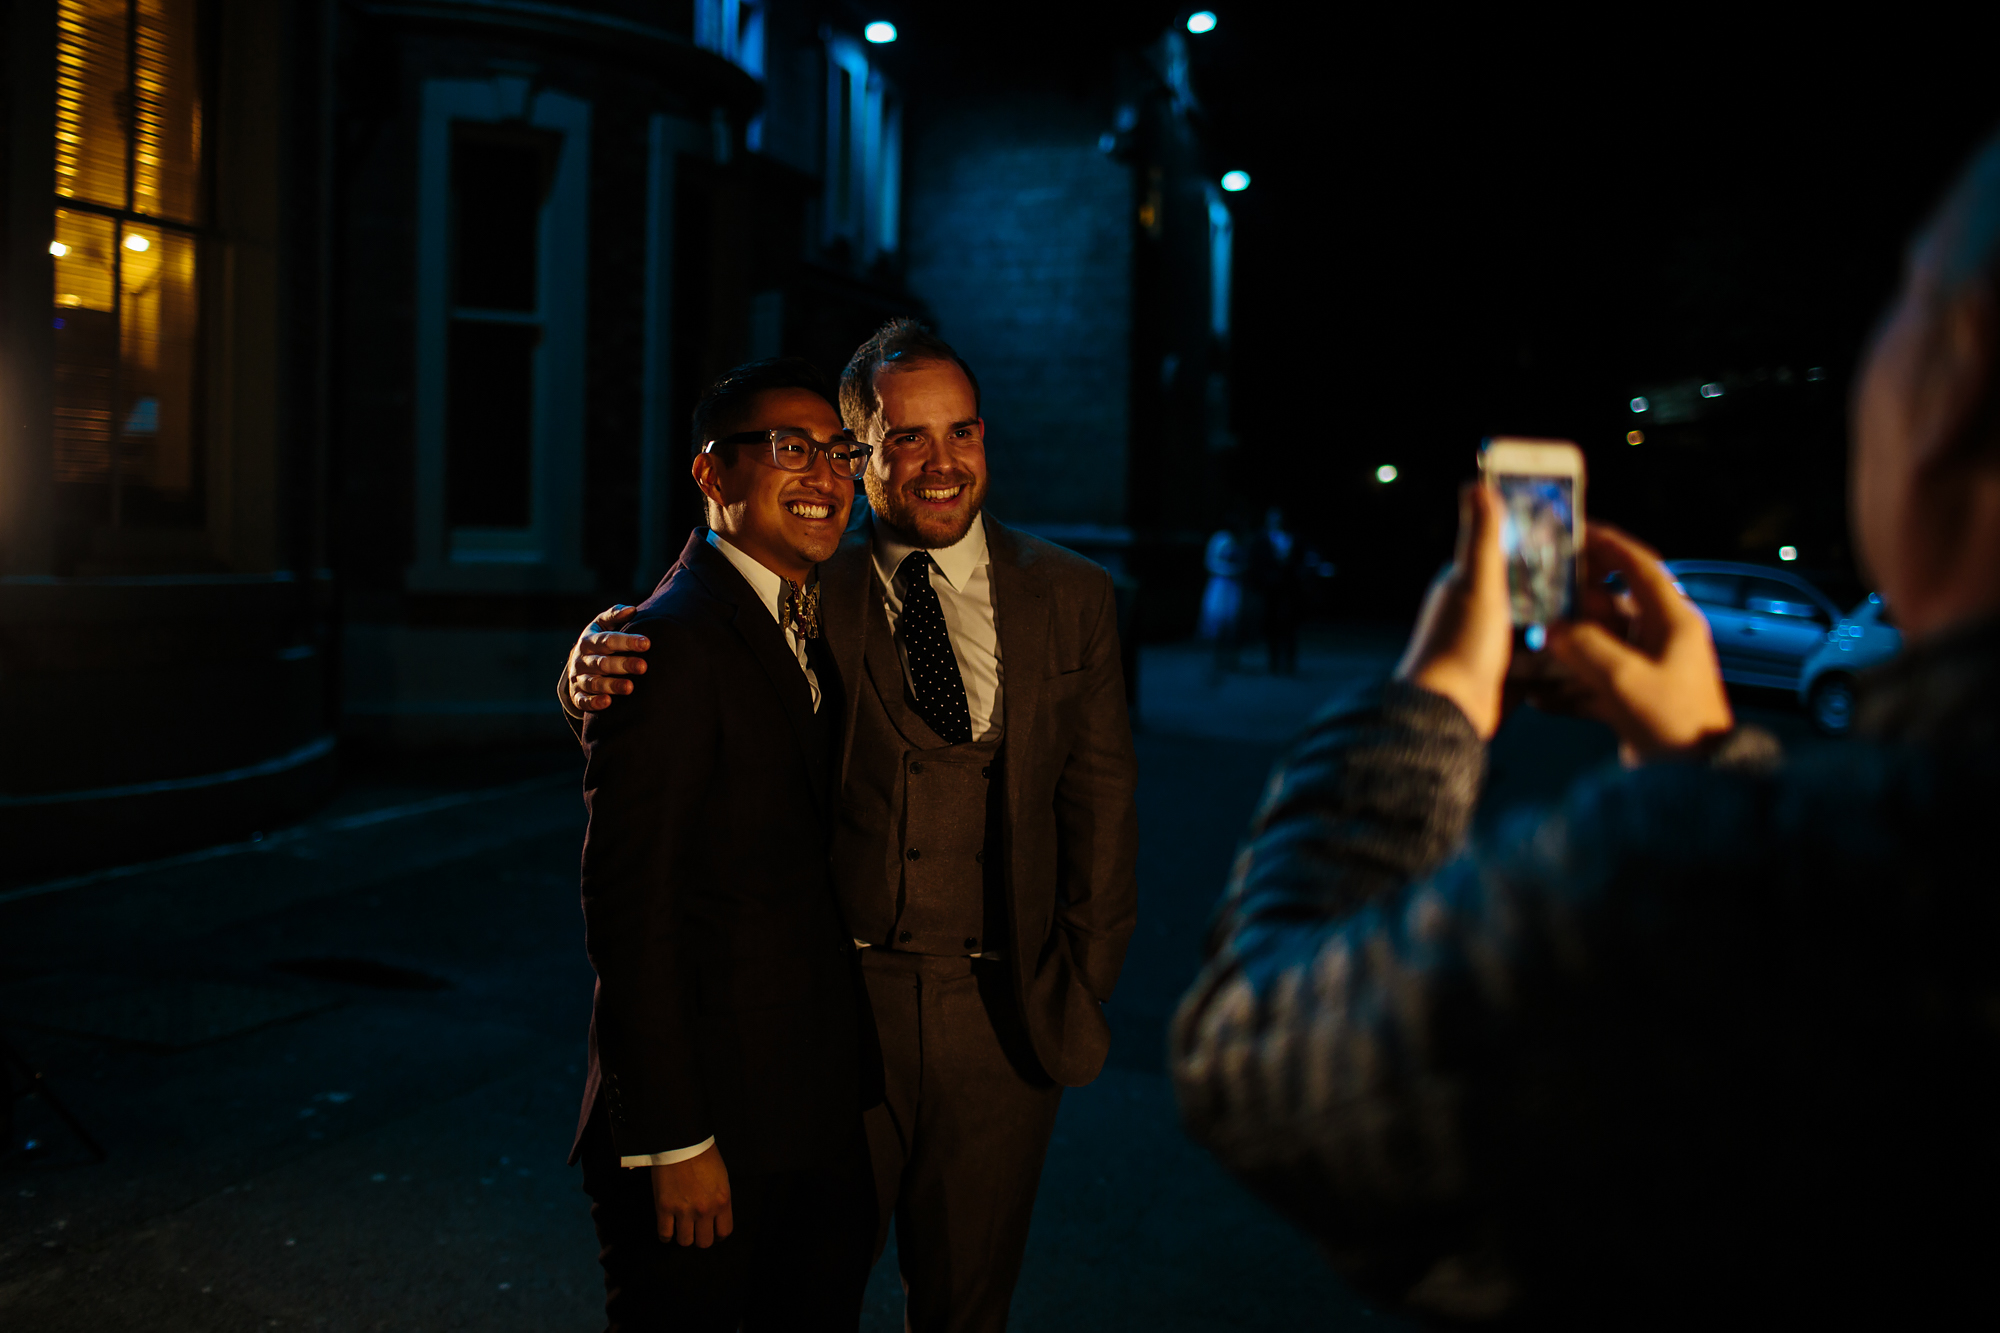 Grooms pose for a photo at a gay wedding